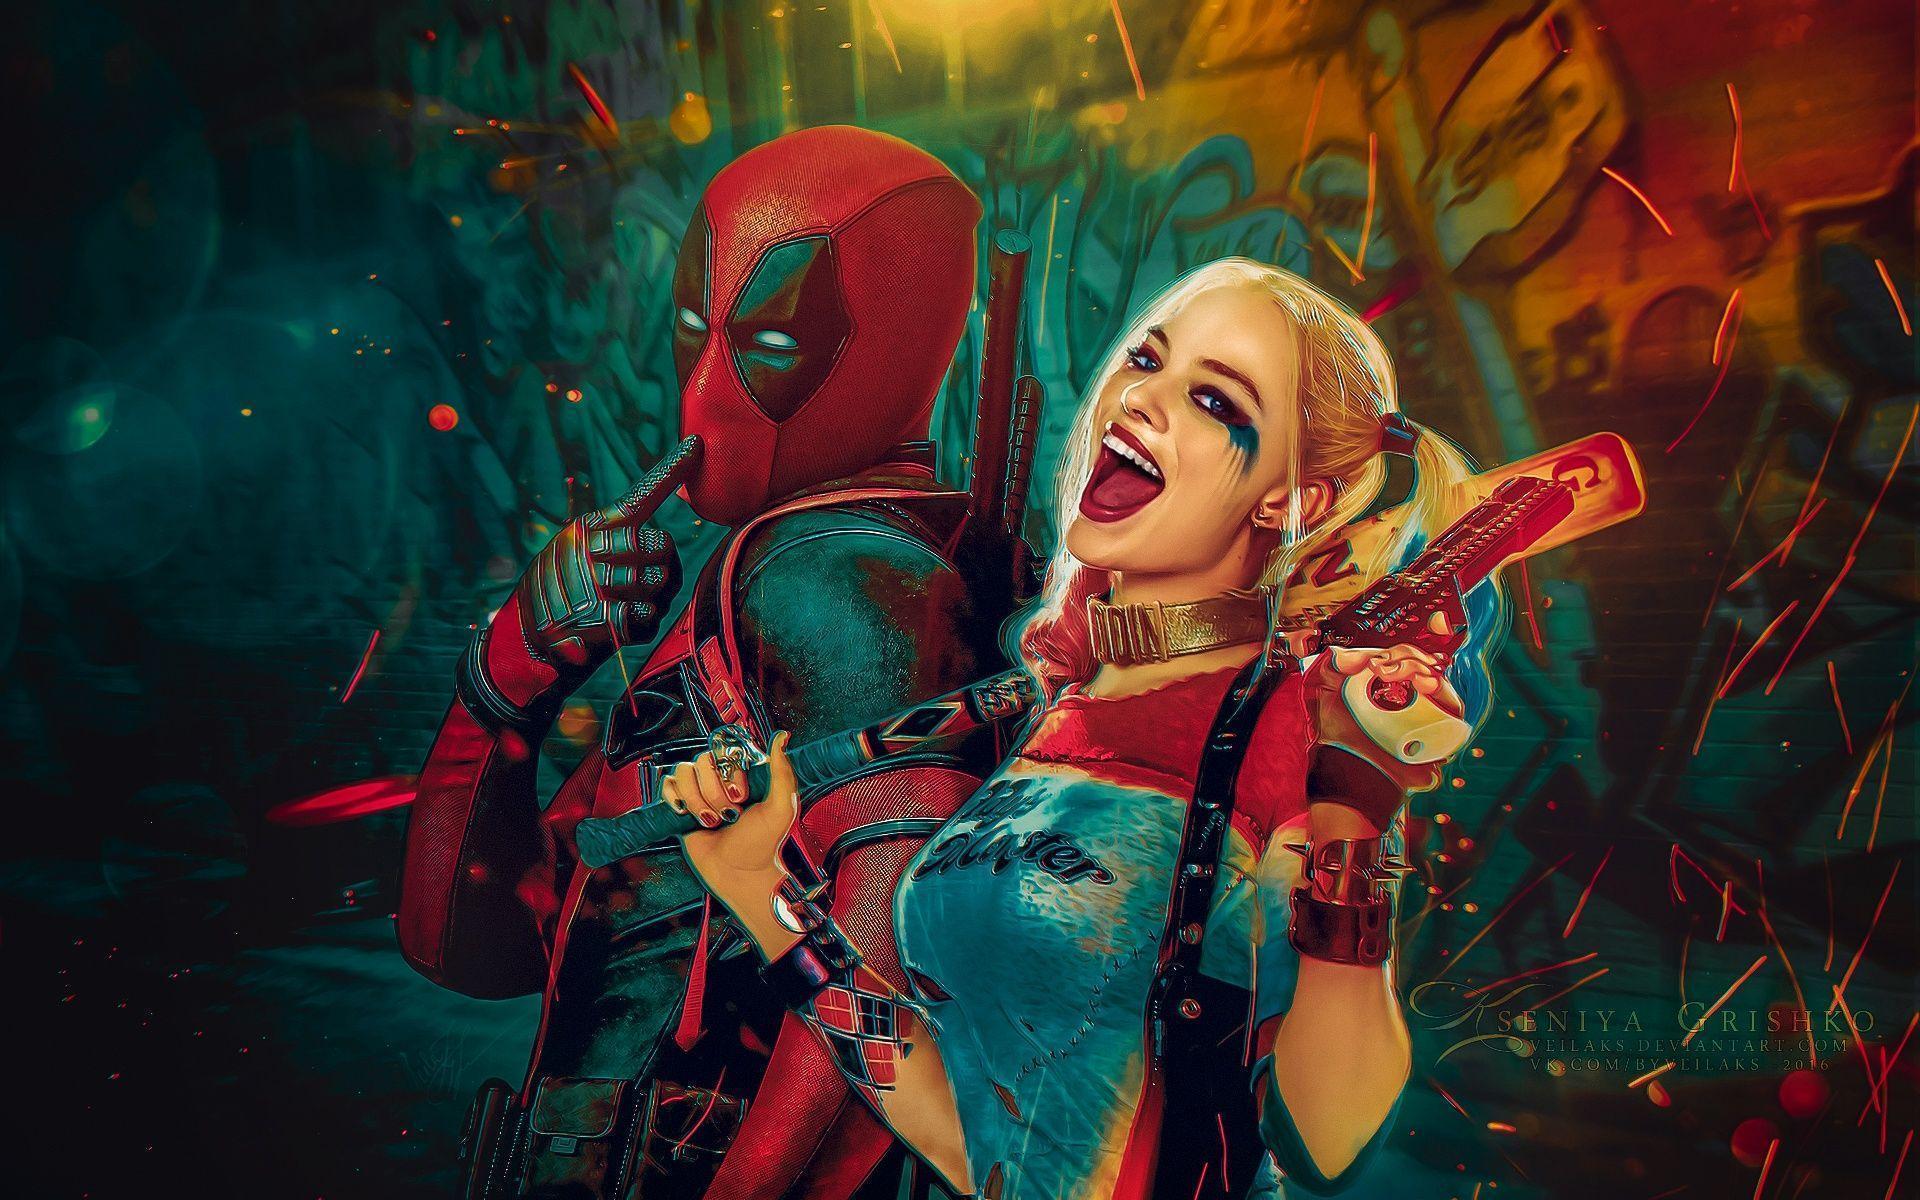 Astonishing Suicide Squad Wallpaper HD Download. Harley quin